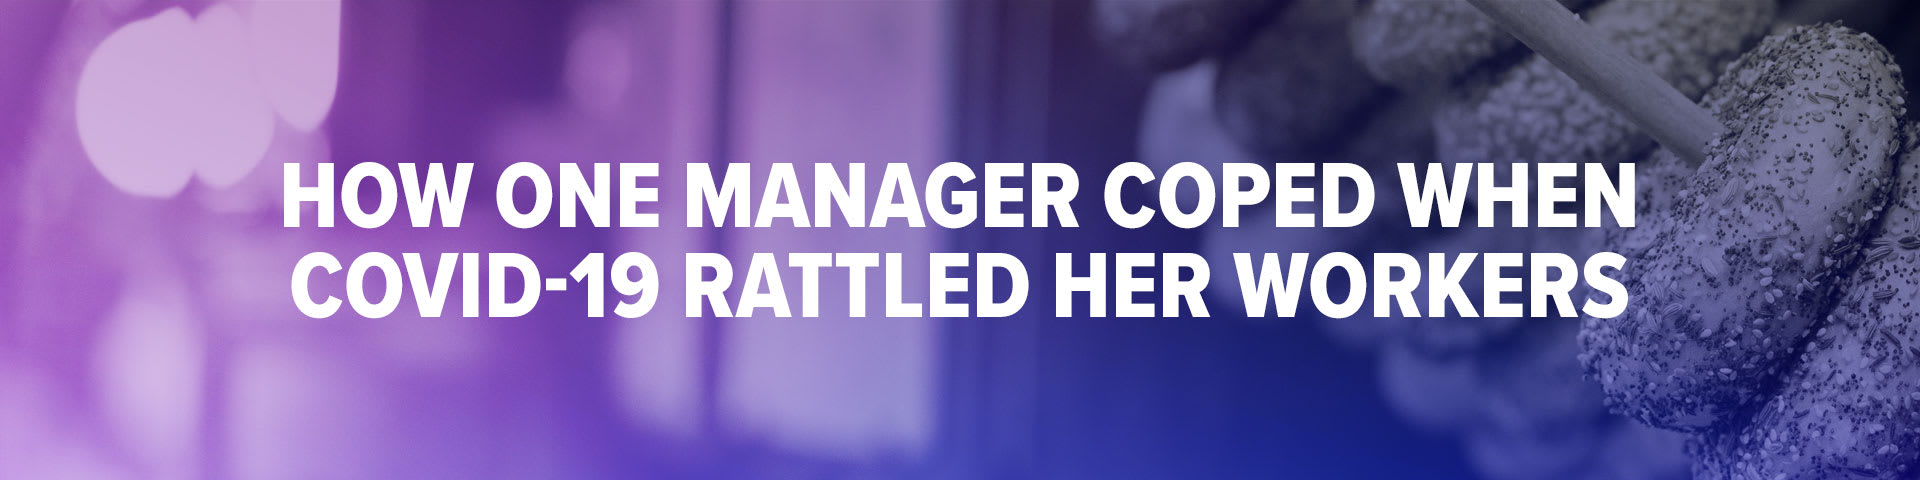 How One Manager Coped when COVID-19 Rattled Her Workers